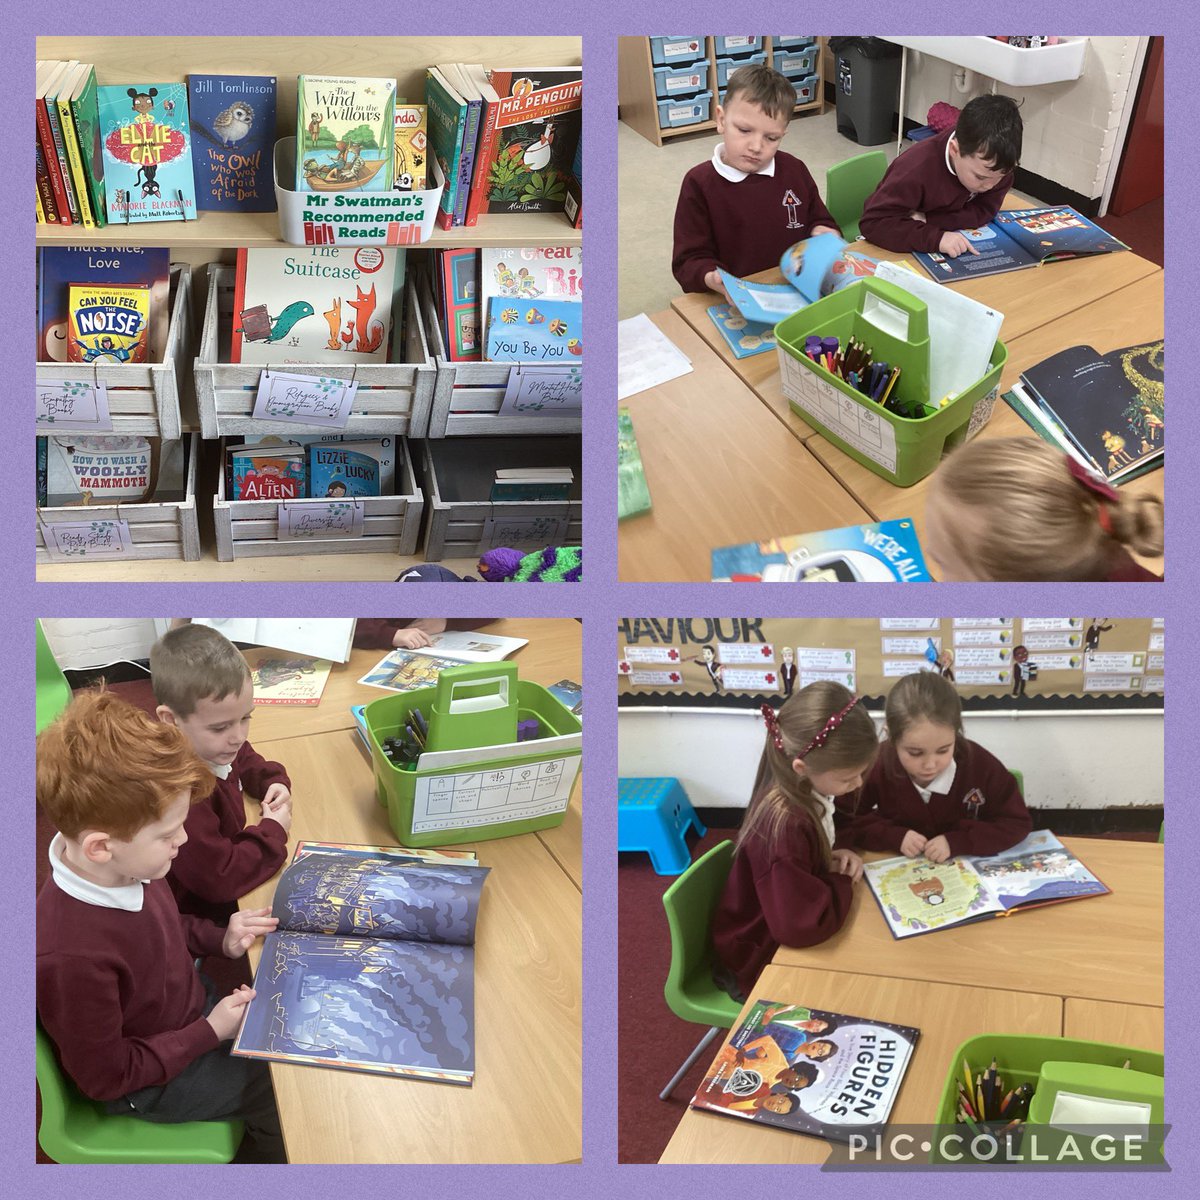 Year 2 love their new reading area & with over 100 high quality texts to choose from they were excited to get reading. The Comet by @Joetoddstanton & We are all Wonders by @RJPalacio were great reads so far.
 @CAHKnowsley  @LiteracyCounts1 @MrEPrimary @OpenUni_RfP @booksfortopics